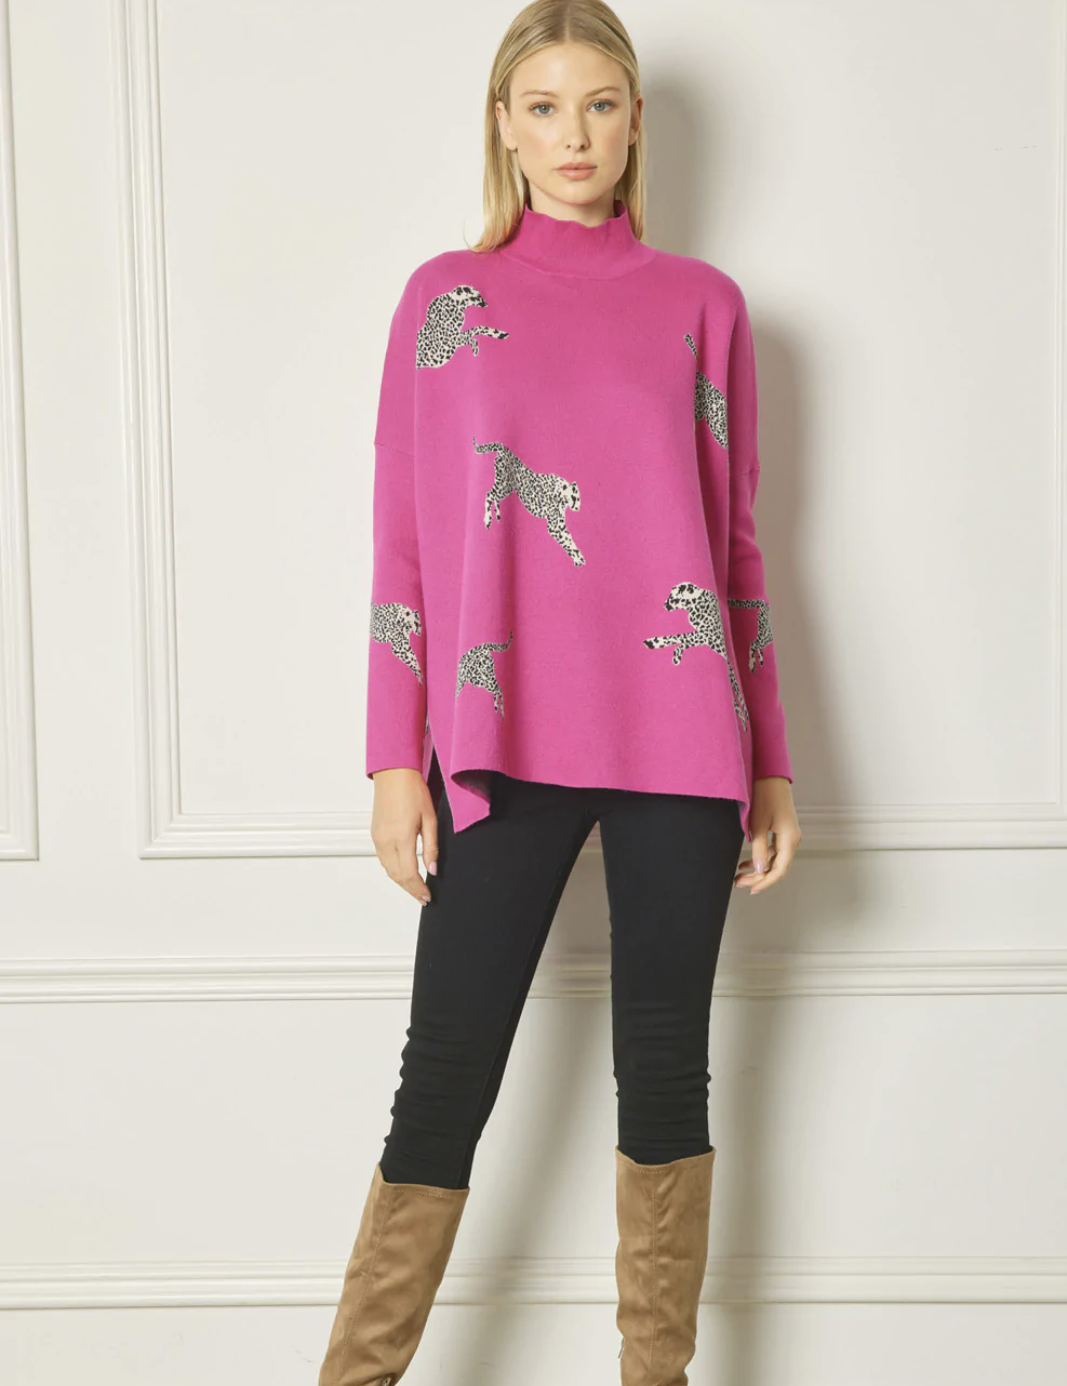 Hot Pink Oversized Leopard Sweater – Olive You Kids Clothing